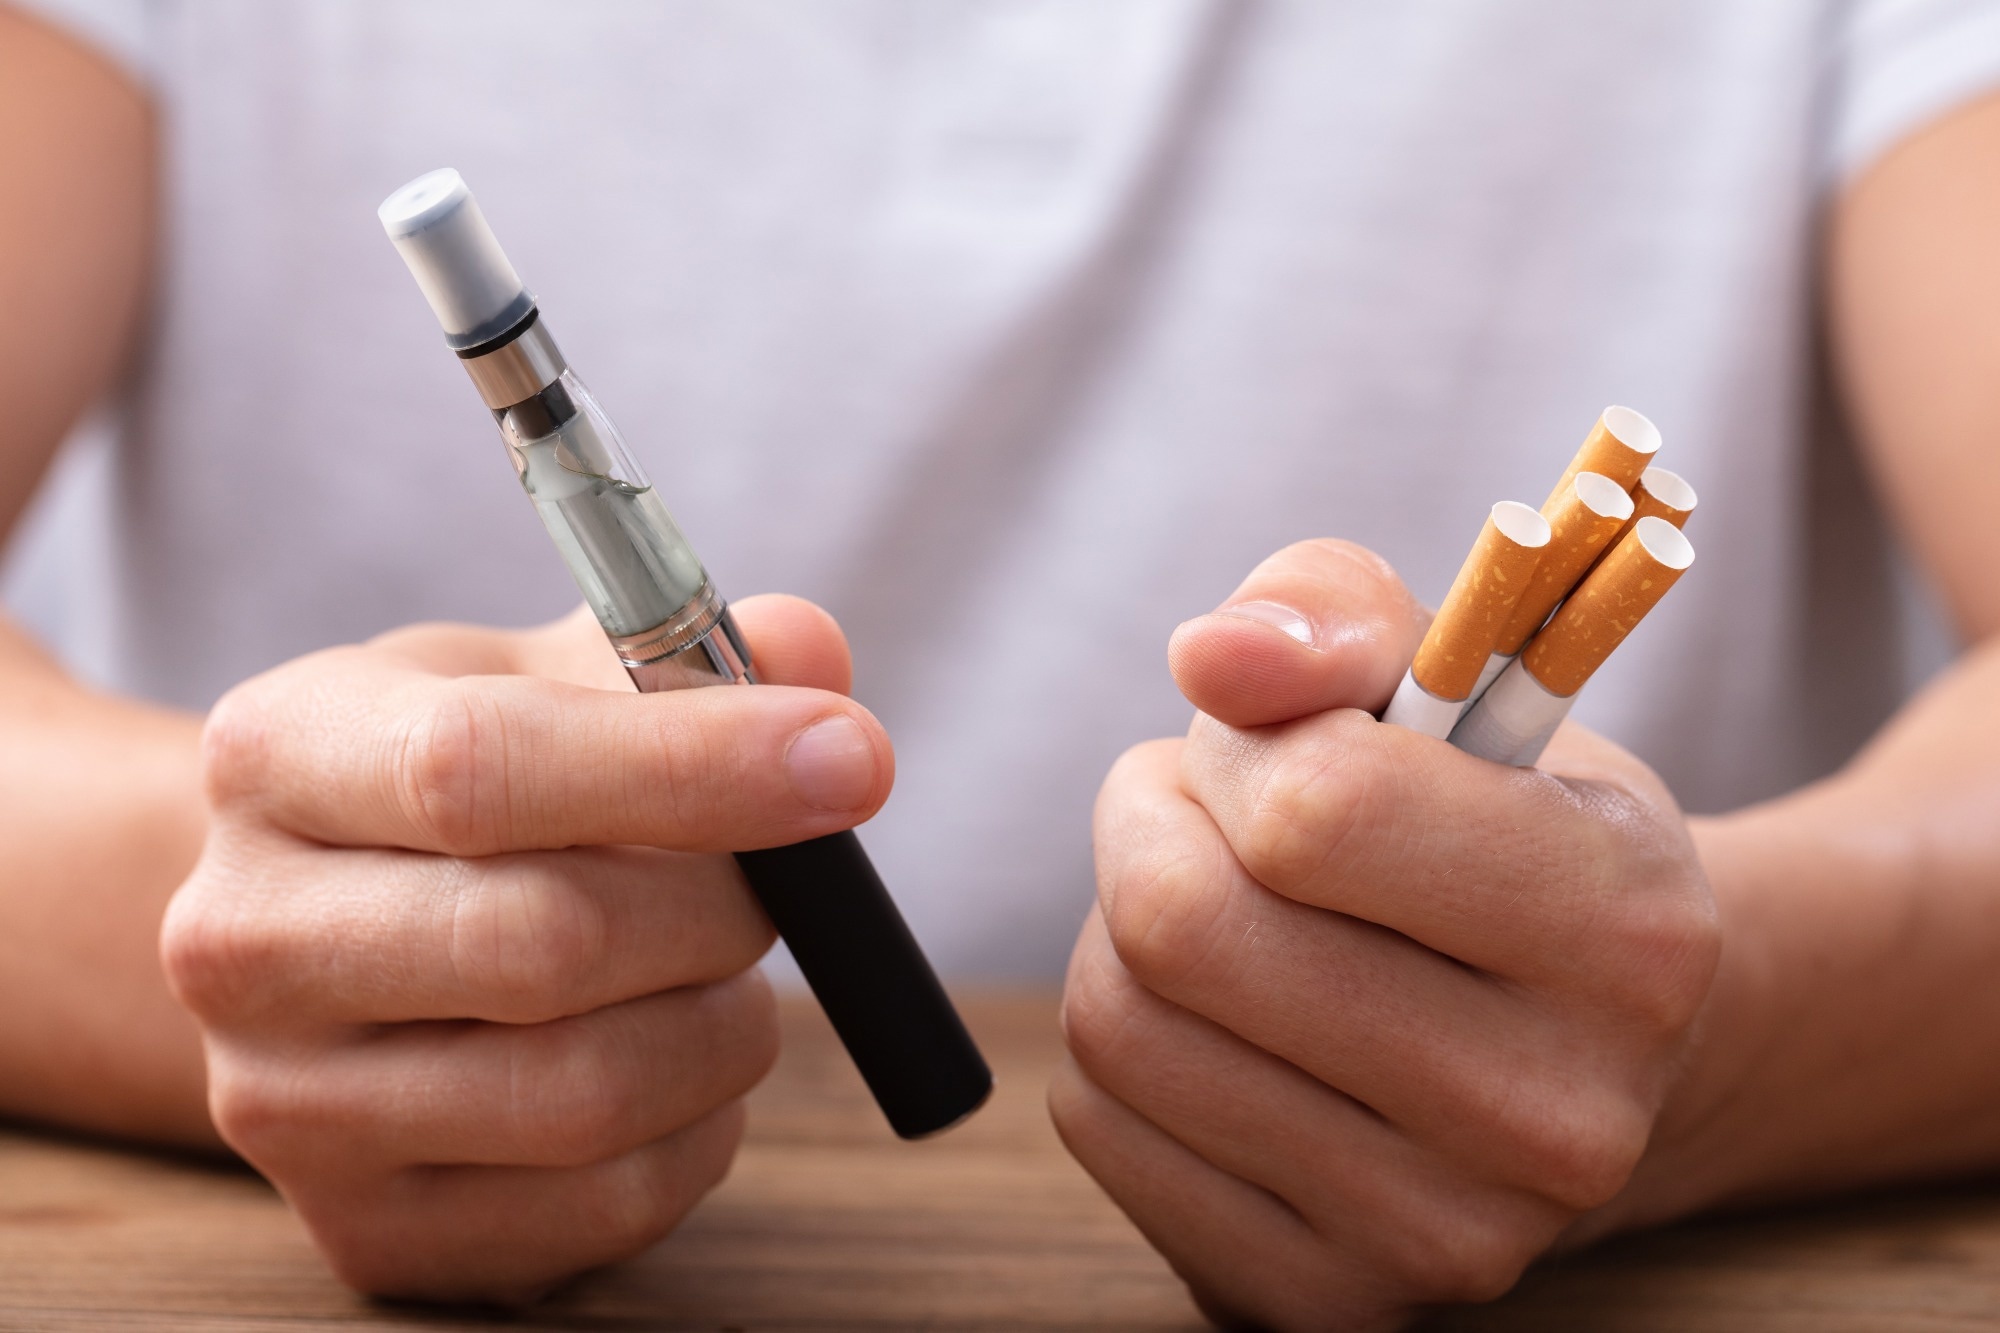 Study: The toxic effects of electronic cigarette aerosol and cigarette smoke on cardiovascular, gastrointestinal and renal systems in mice. Image Credit: Andrey_Popov/Shutterstock.com